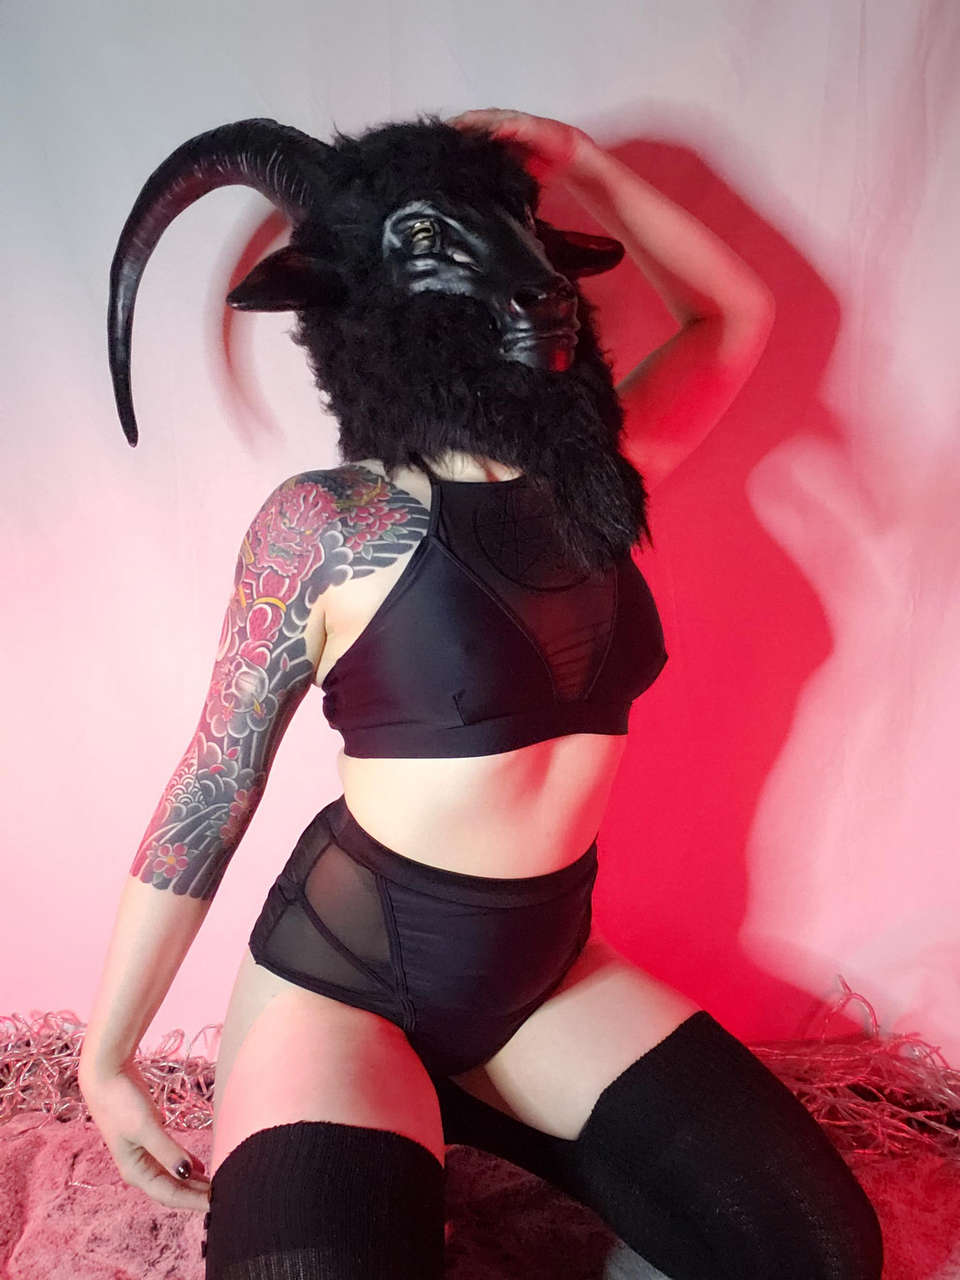 Let Me Be Your Horror Goth Gf Black Phillip Mask By Me Paaapuru Chan Model Nam